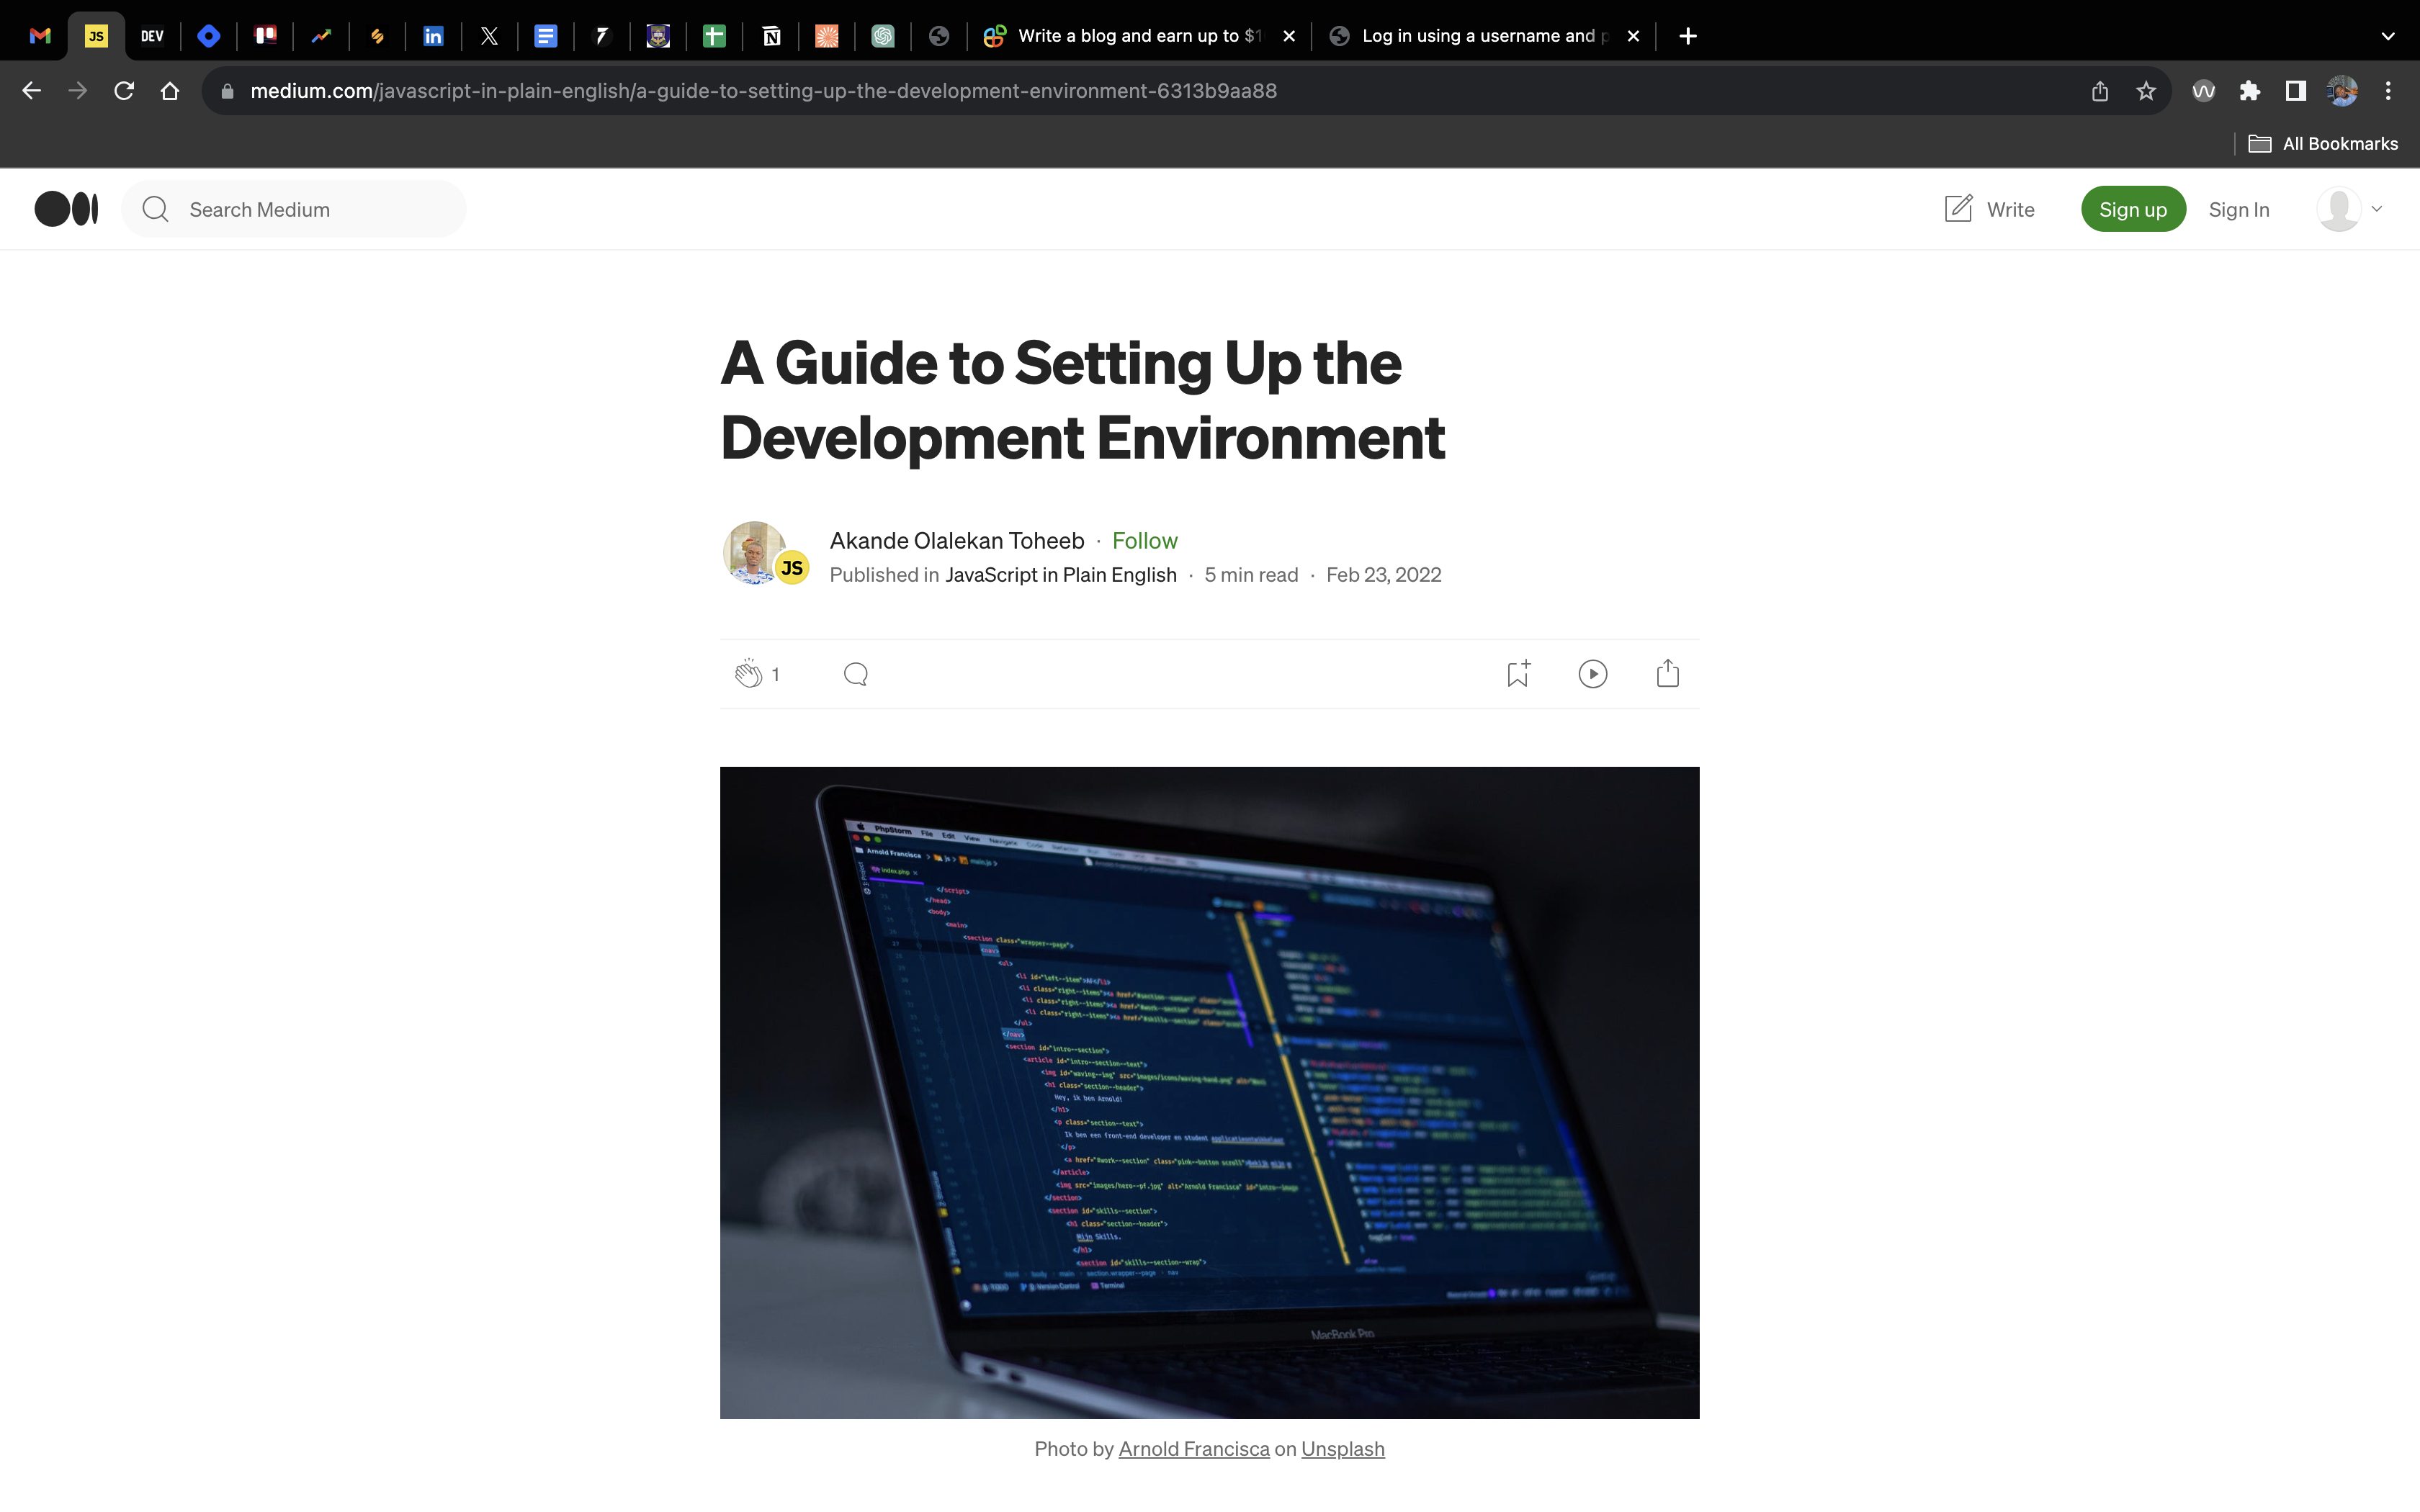 A Guide to Setting Up the Development Environment